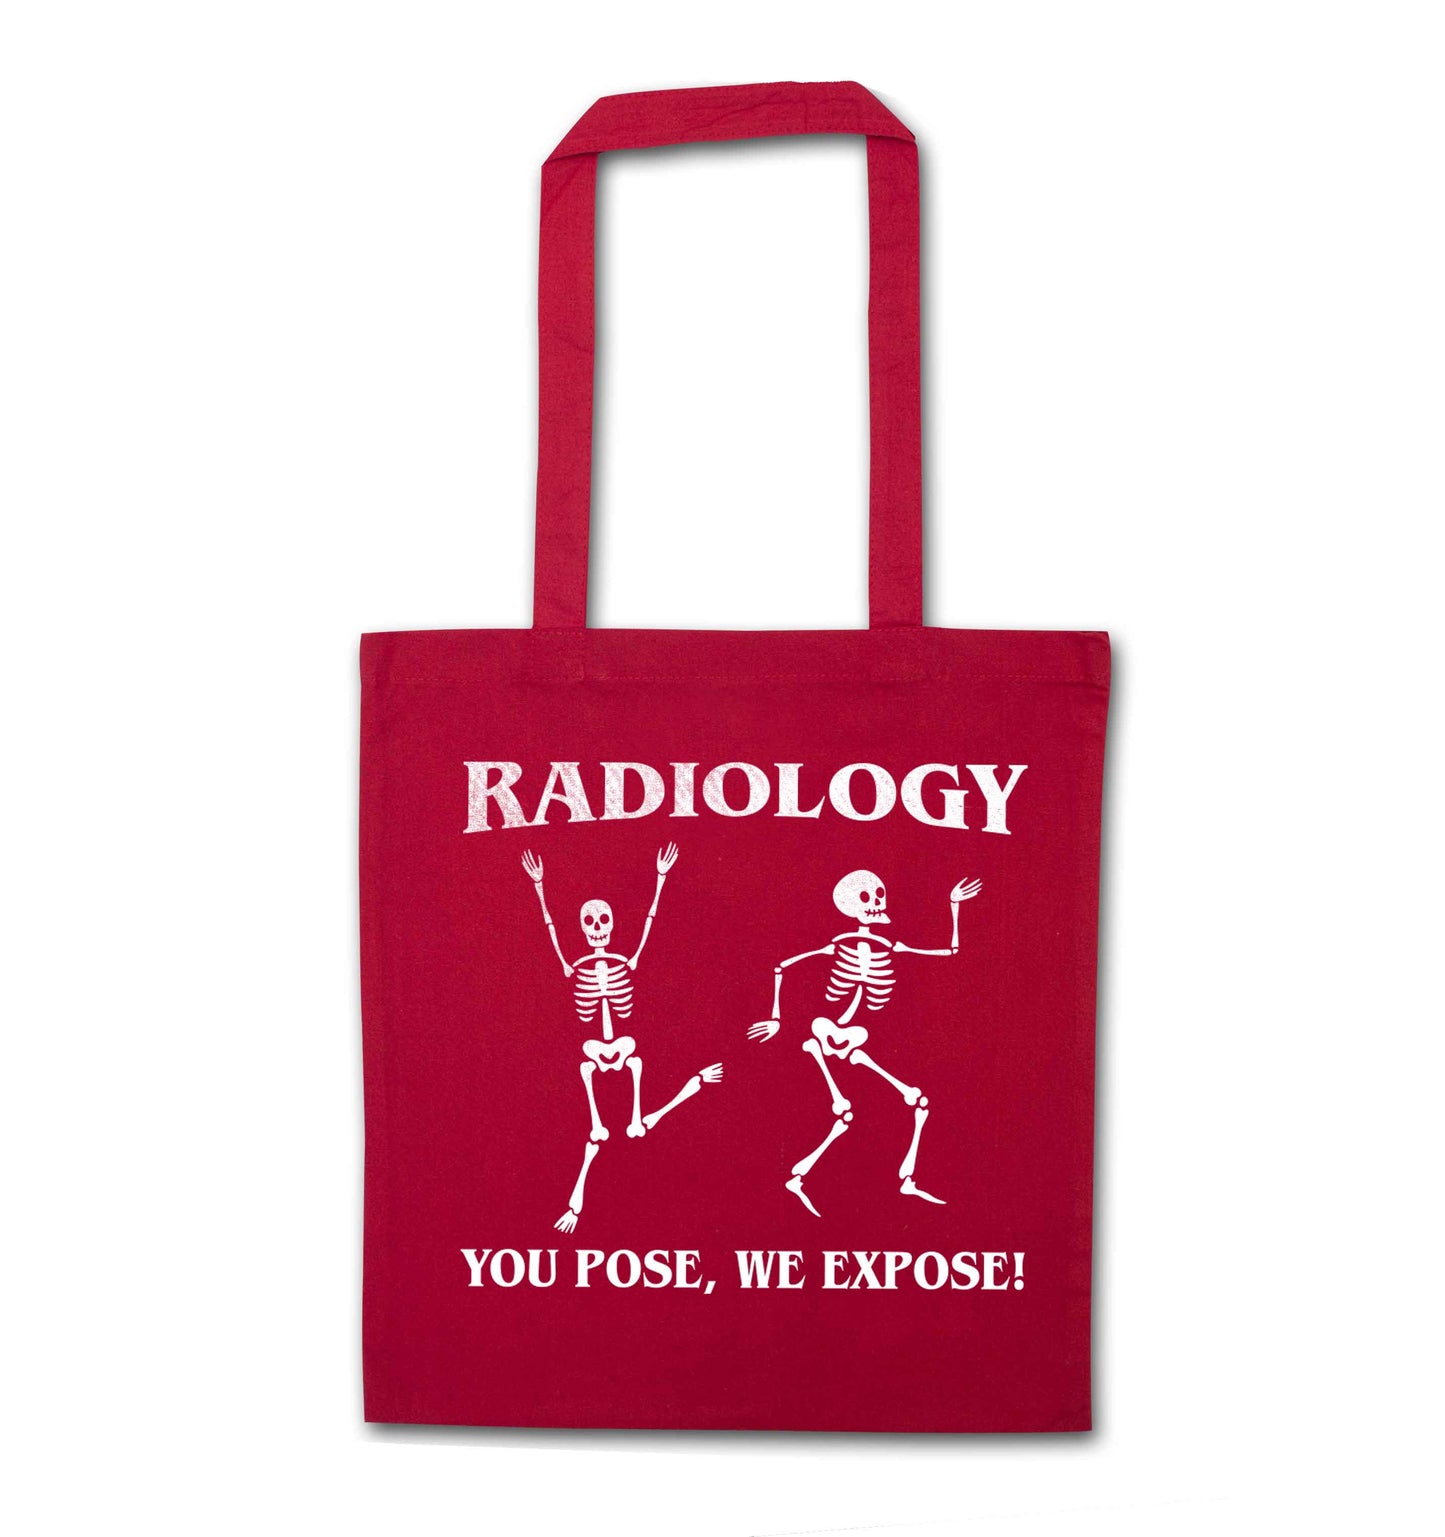 Radiology you pose we expose red tote bag